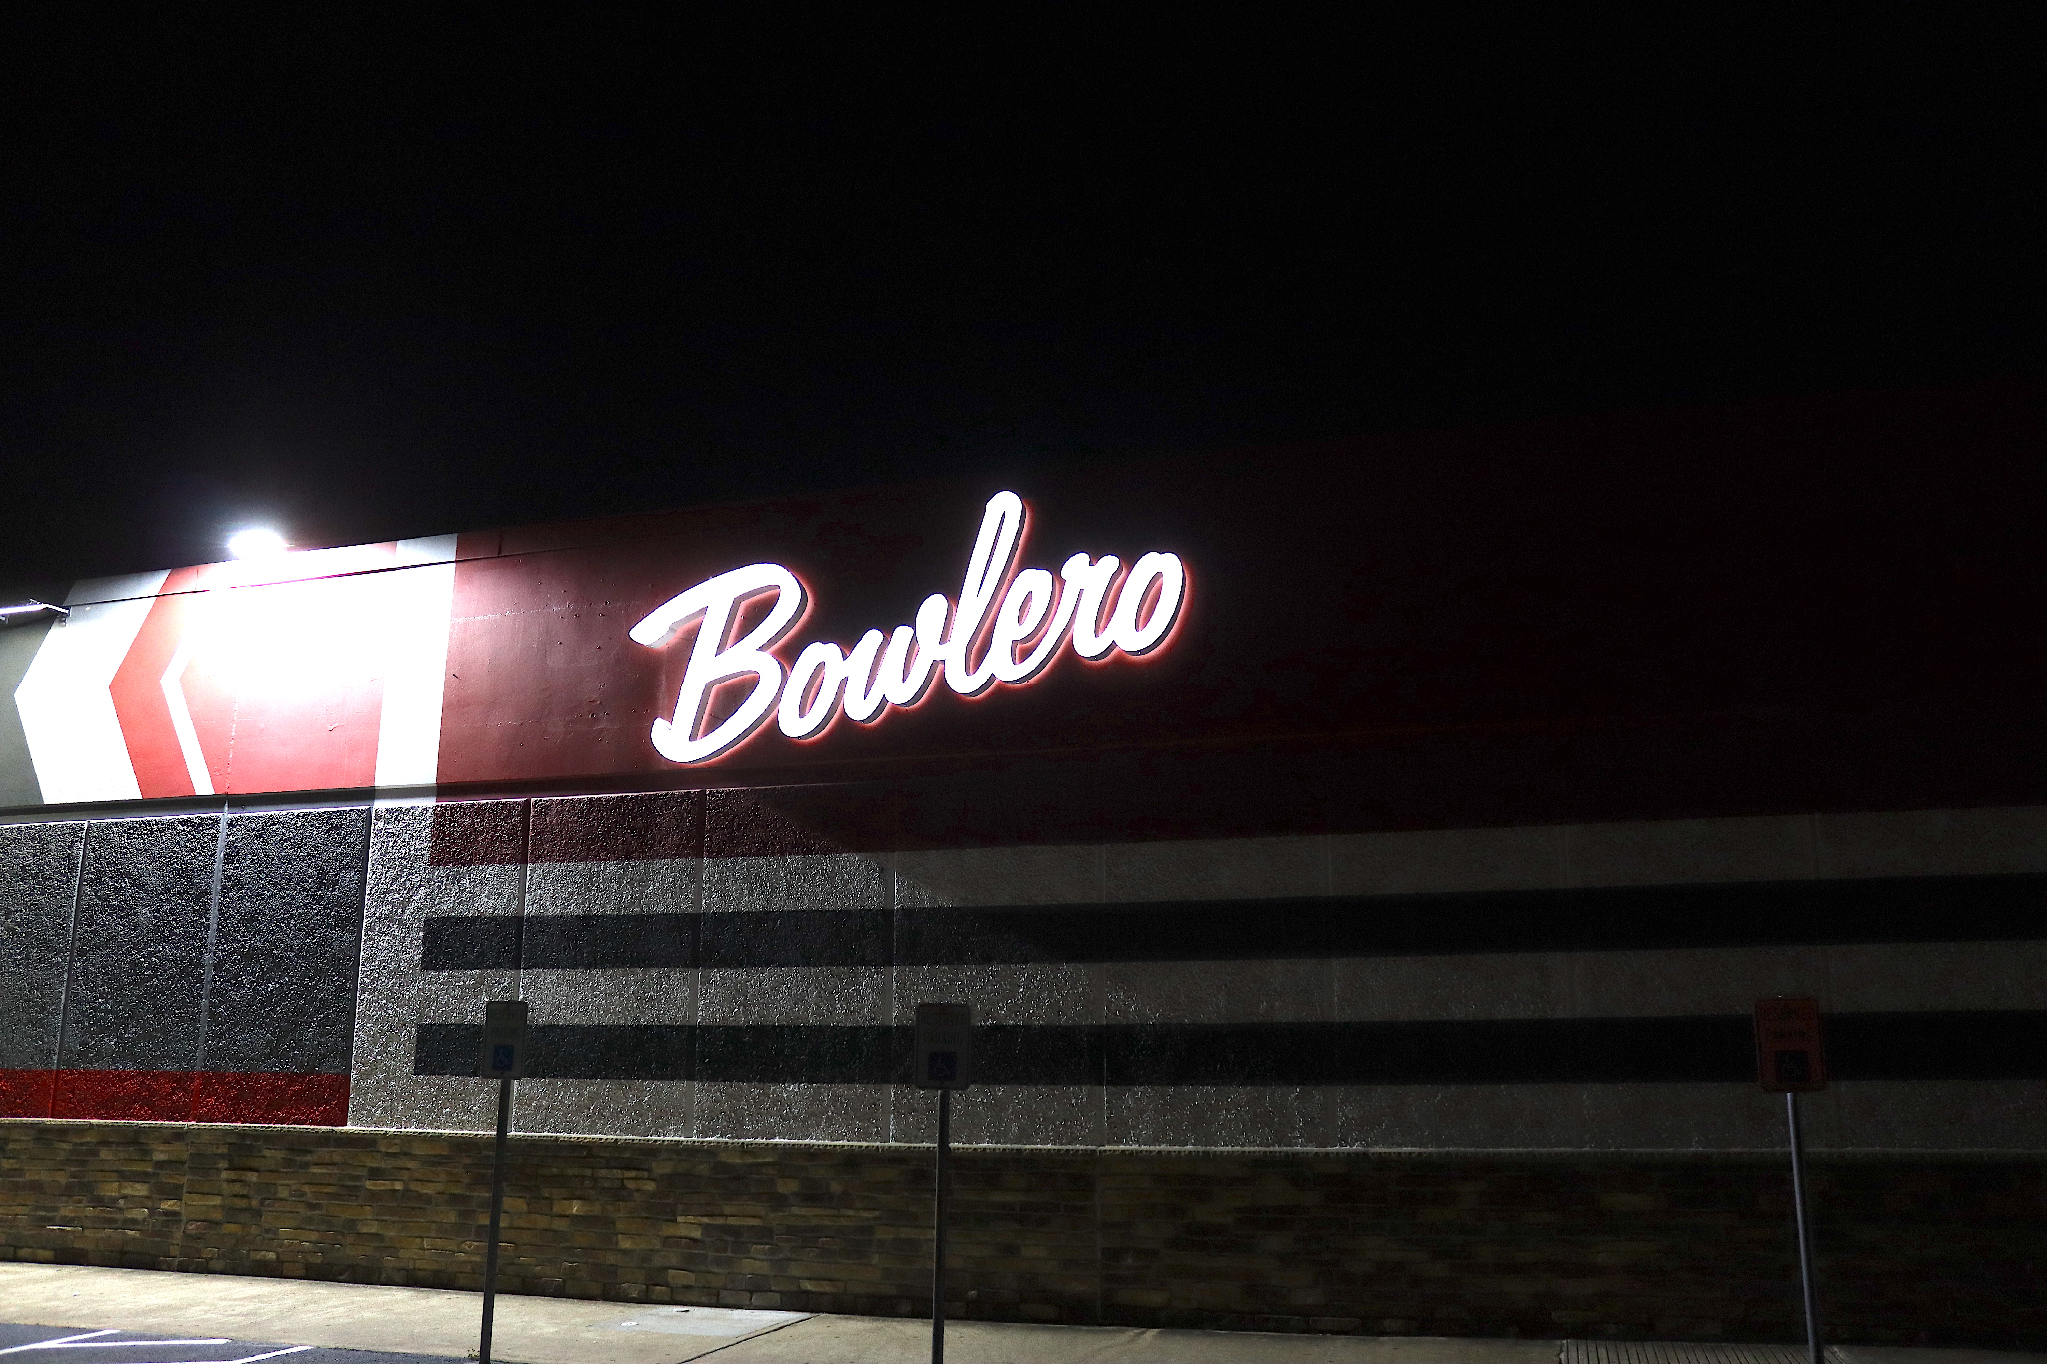 Bowlero Bowling Alley on Bunker Hill